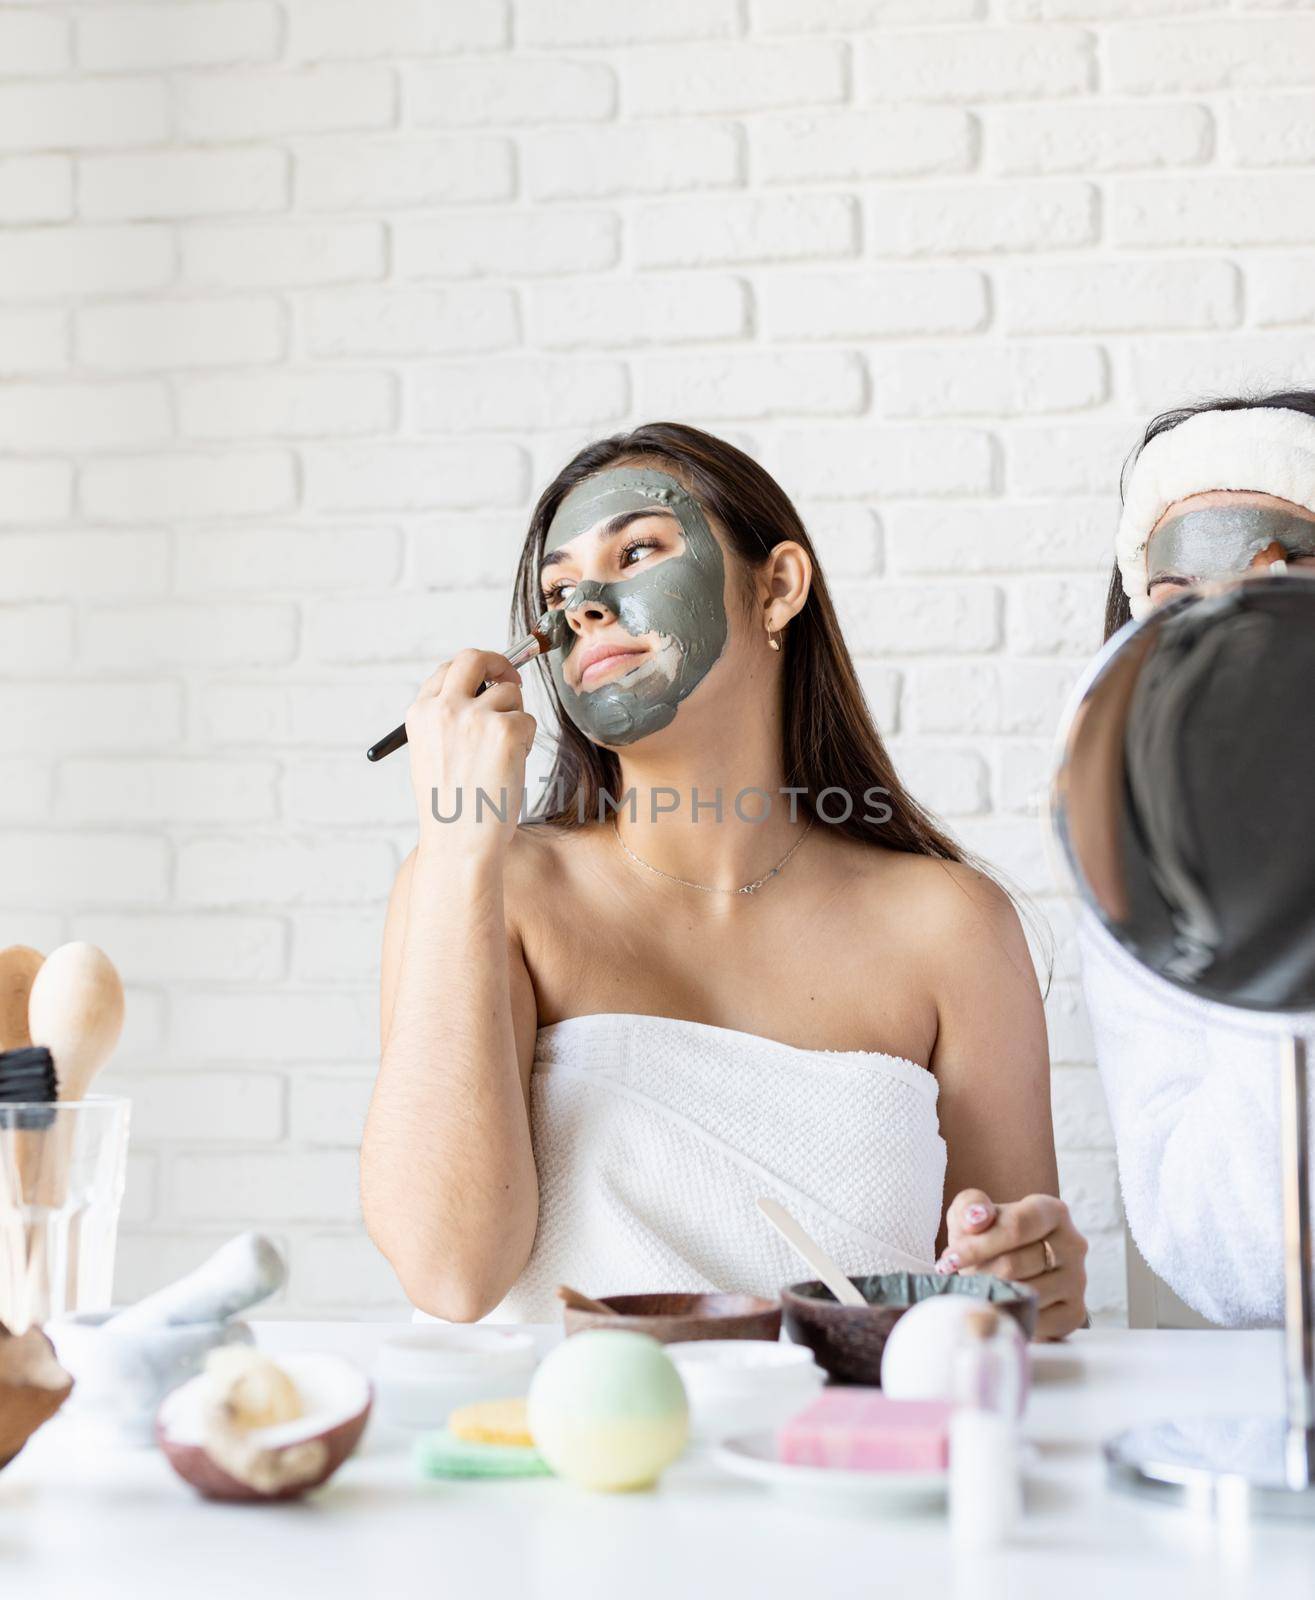 Spa and wellness concept. Self care. Portrait of a beautiful woman with long black hair applying facial mask doing spa procedures